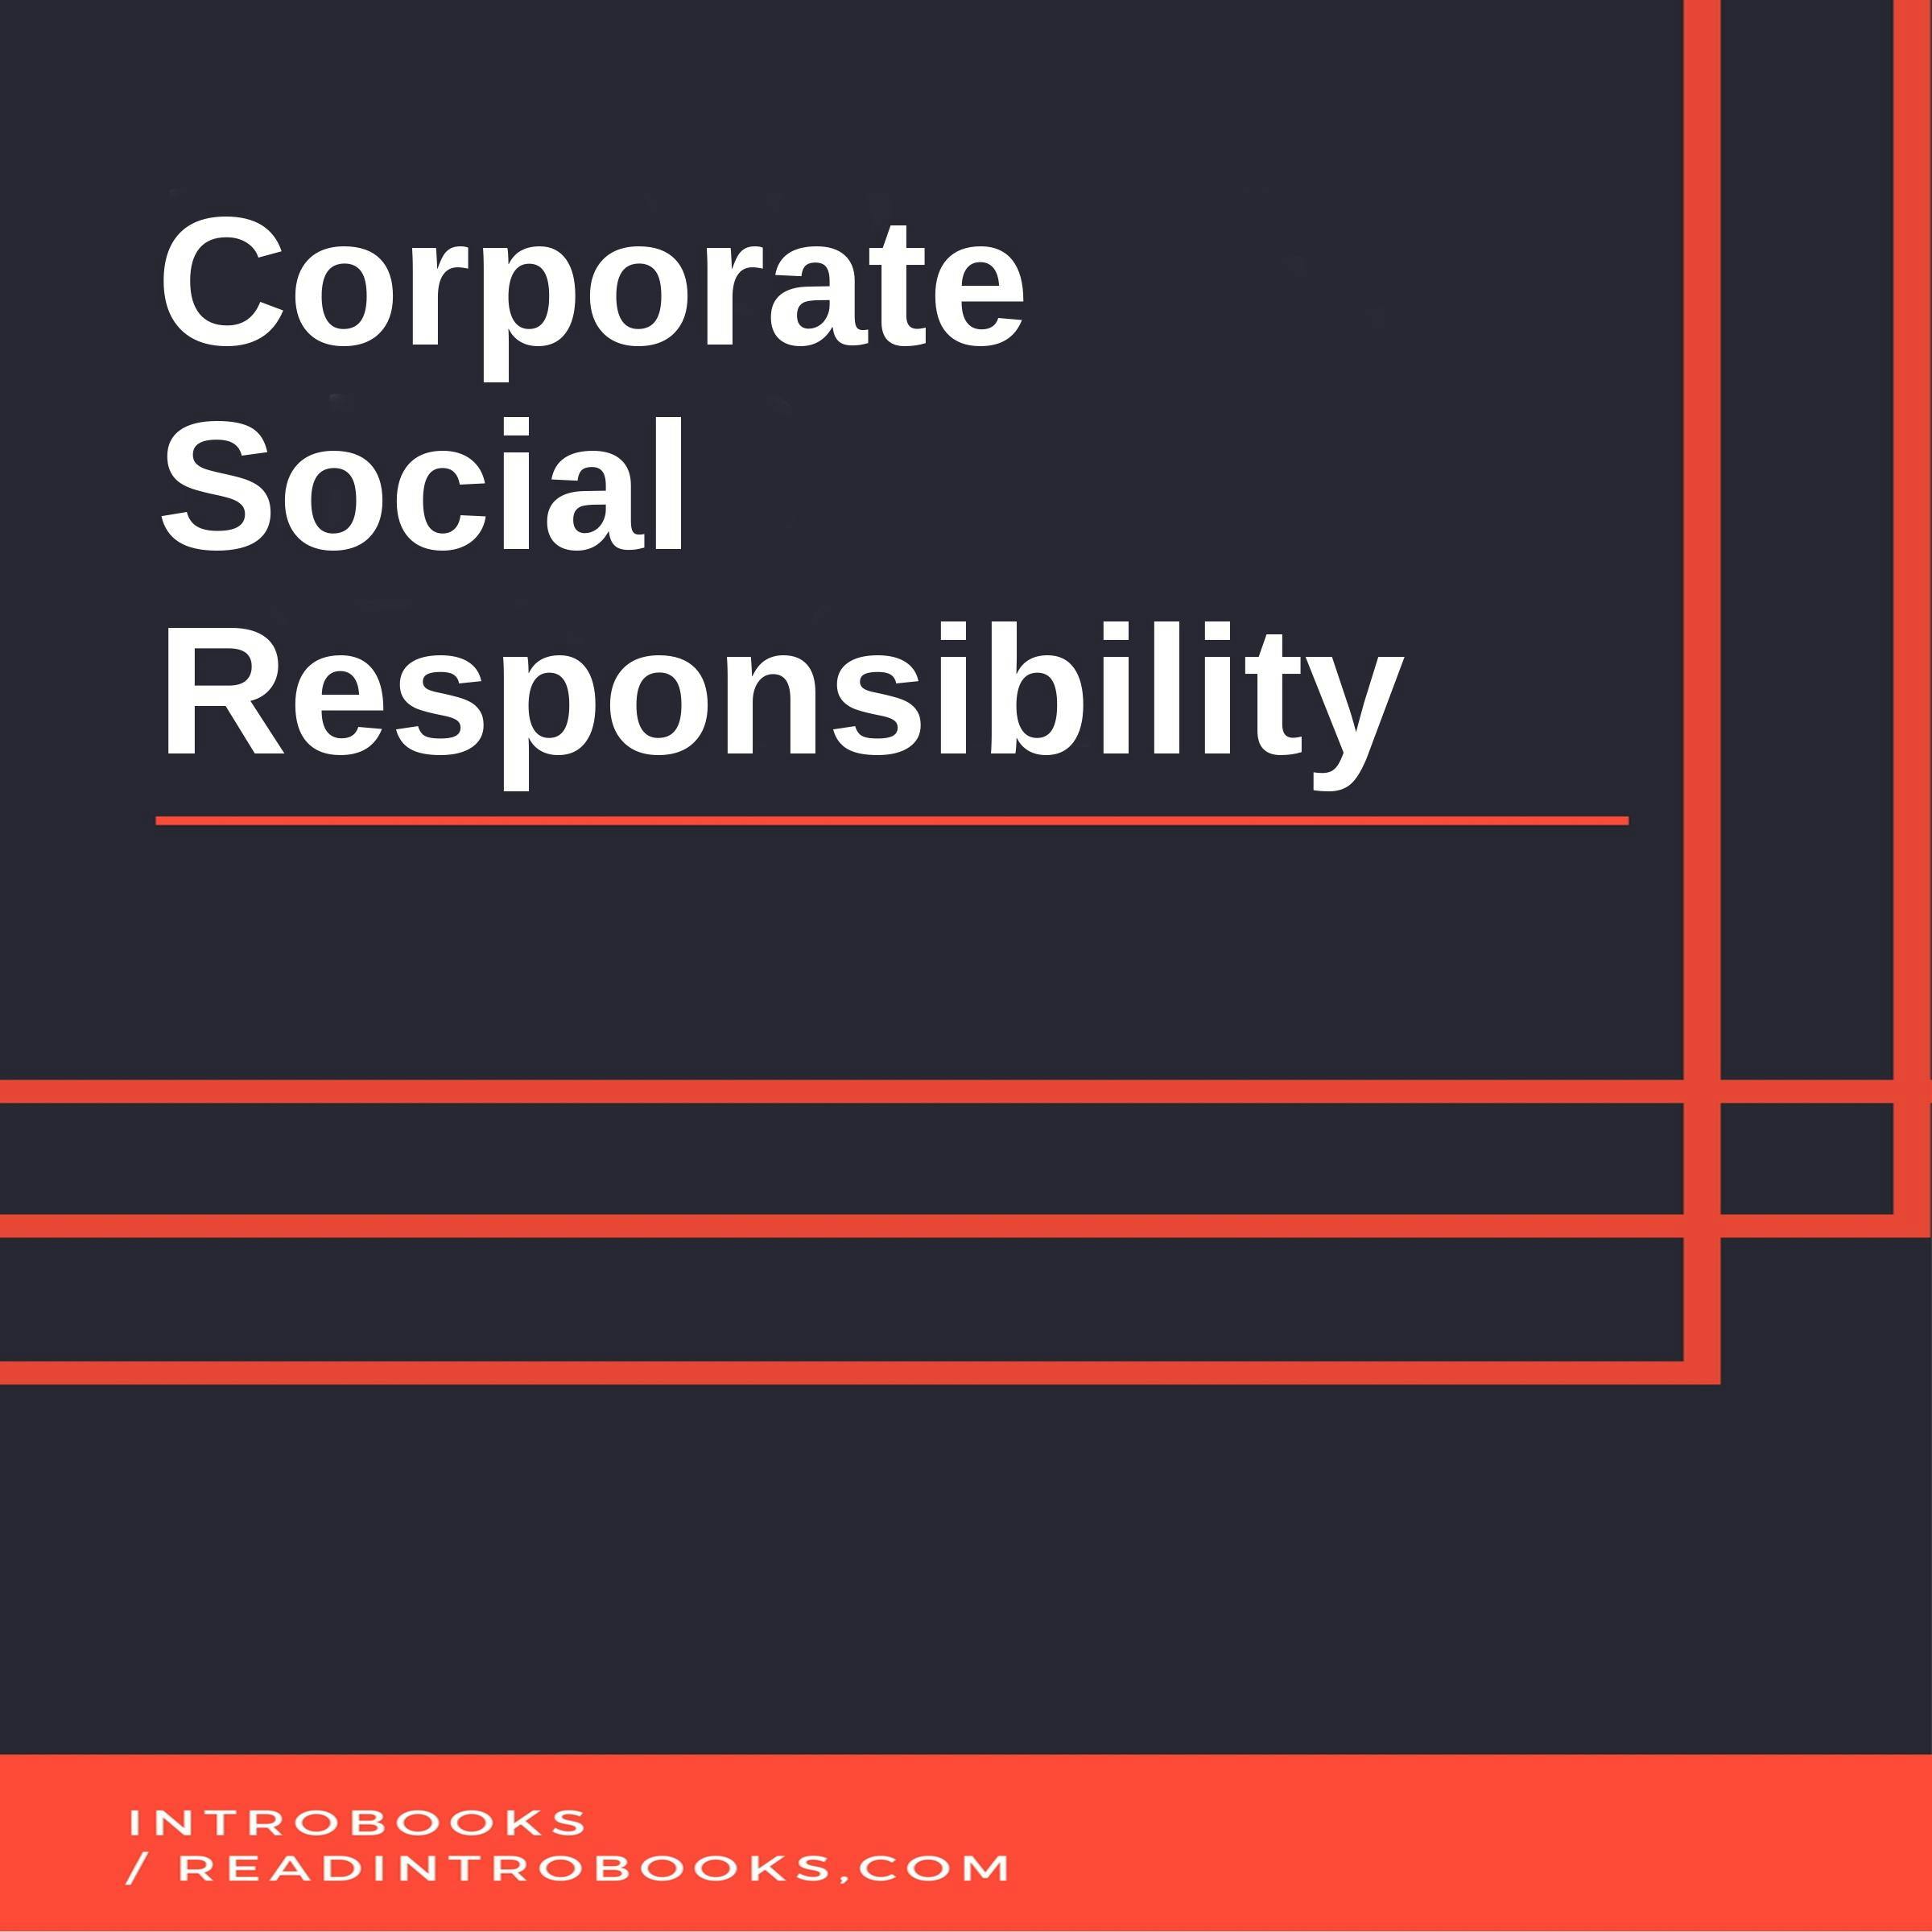 Corporate Social Responsibility - undefined